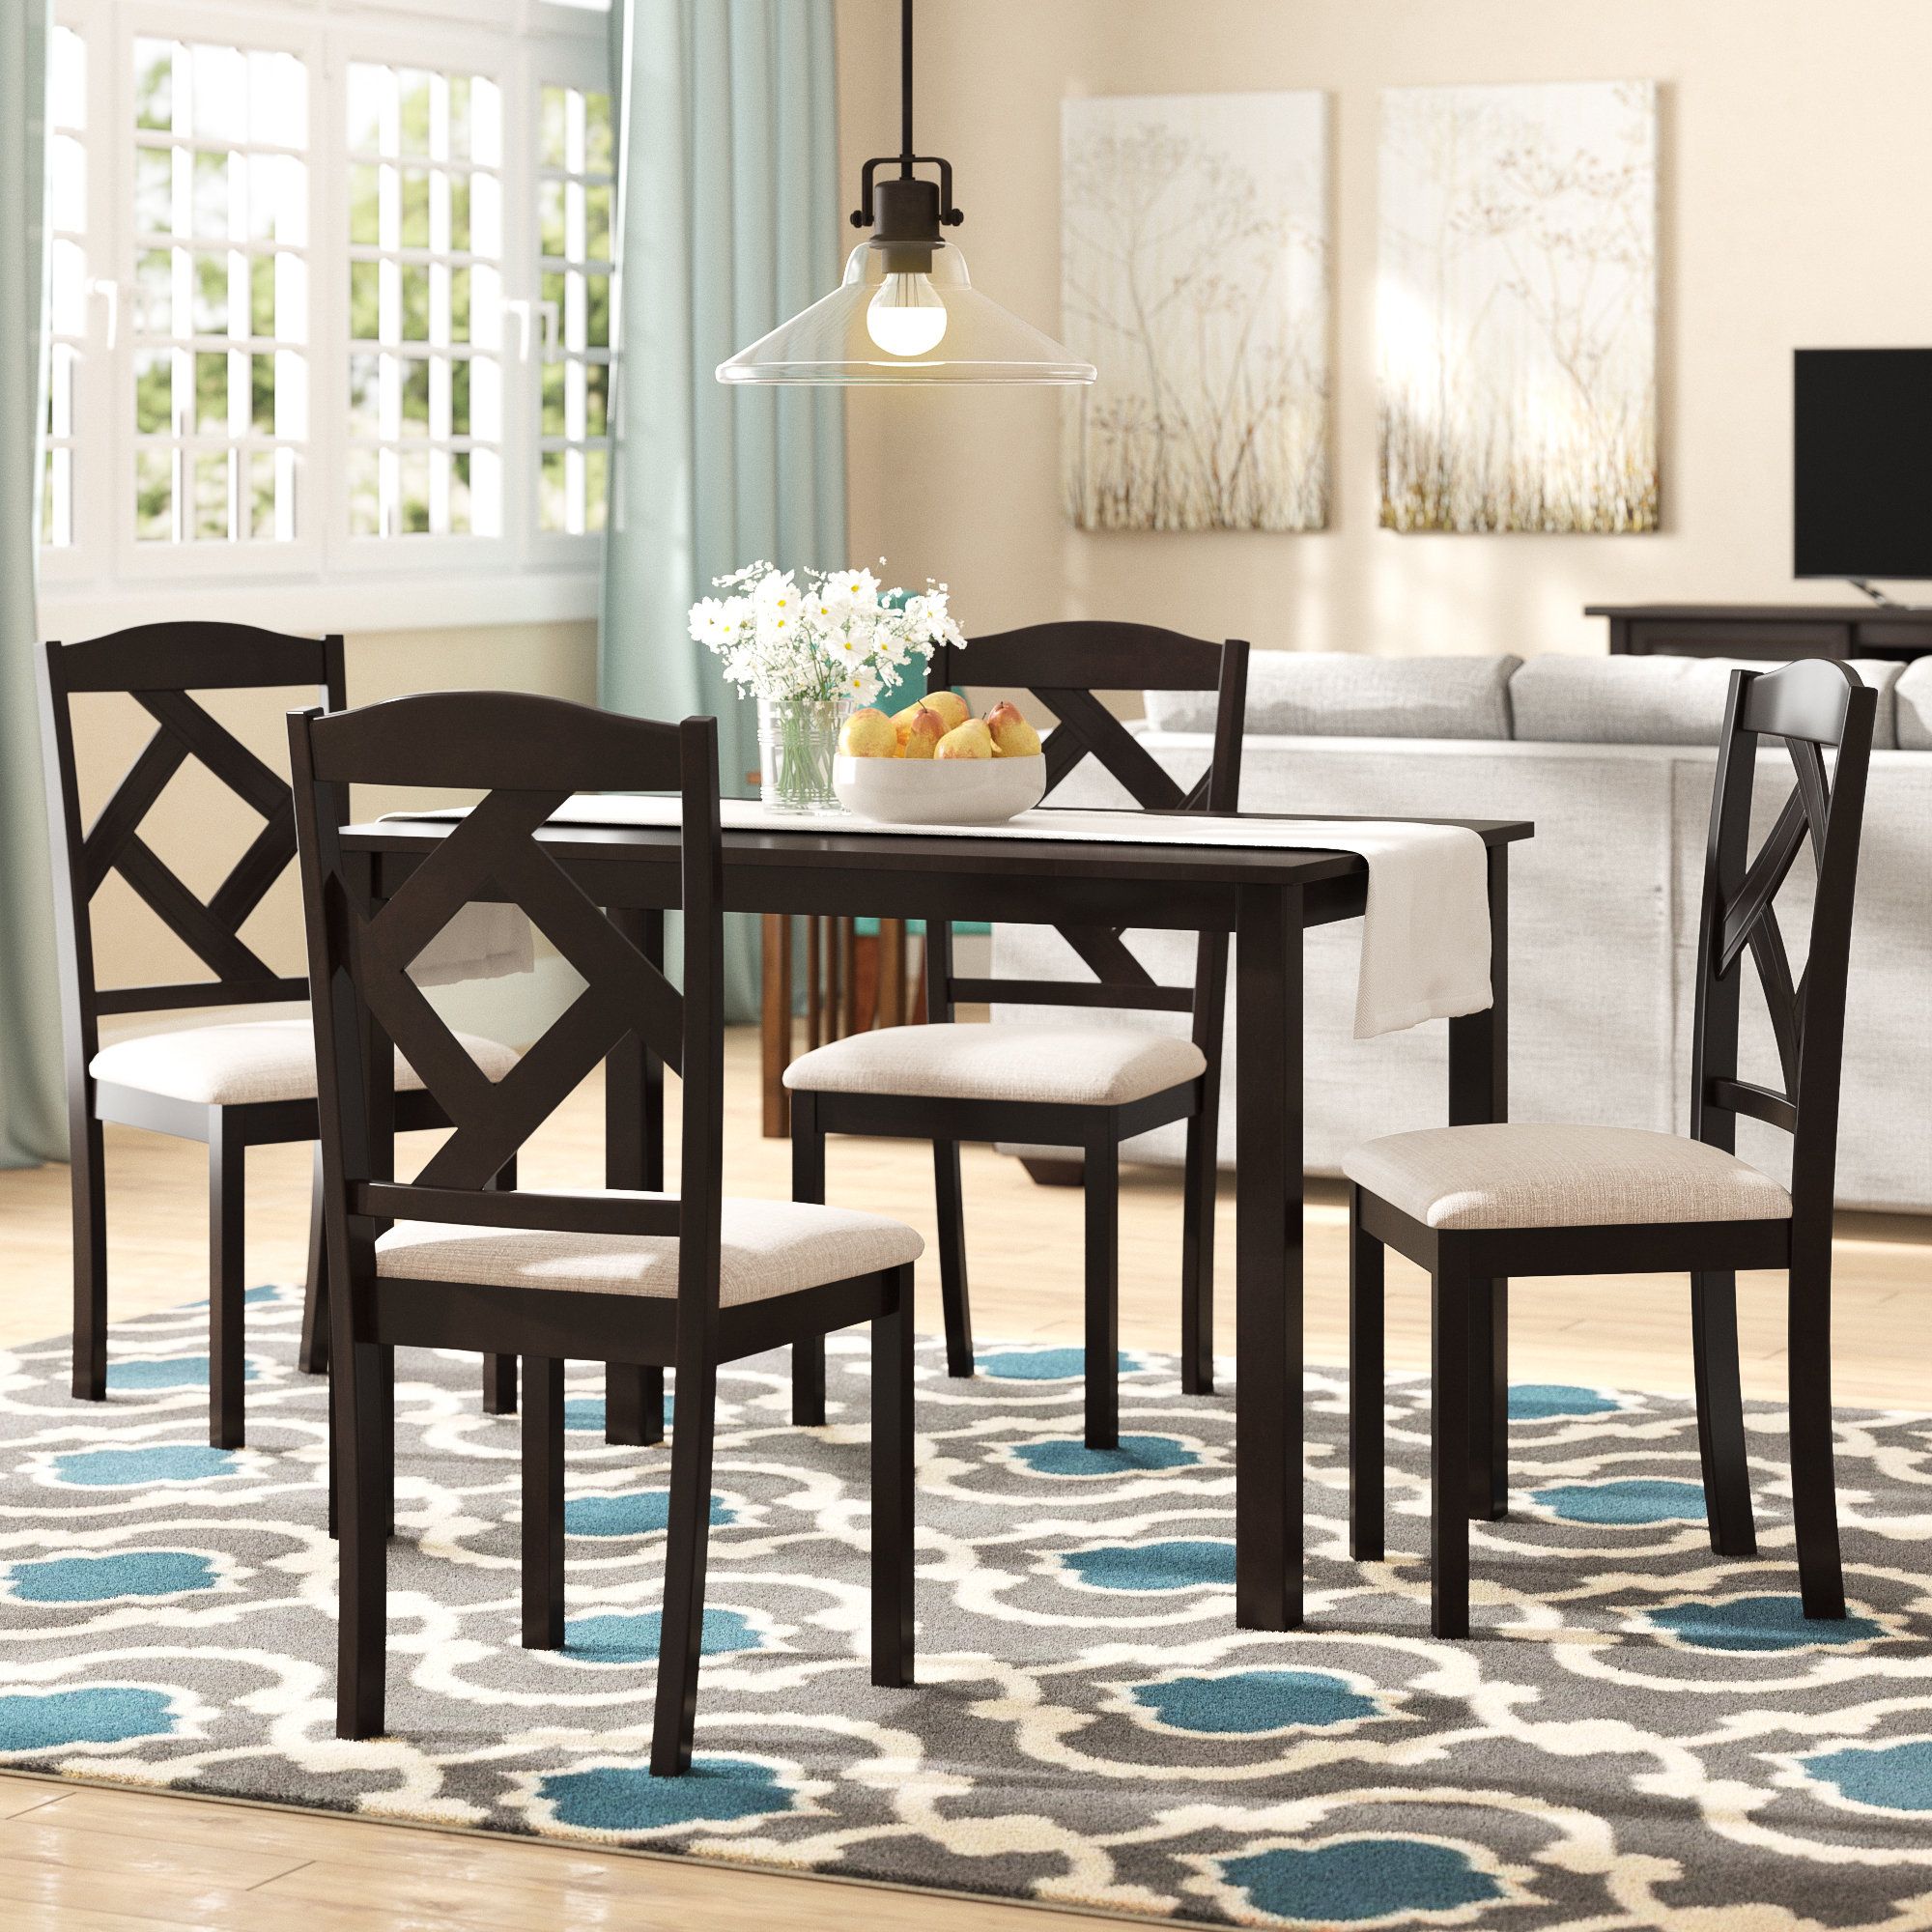 Goosman Modern And Contemporary 5 Piece Breakfast Nook Dining Set Intended For Most Recent 5 Piece Breakfast Nook Dining Sets (Photo 1 of 20)